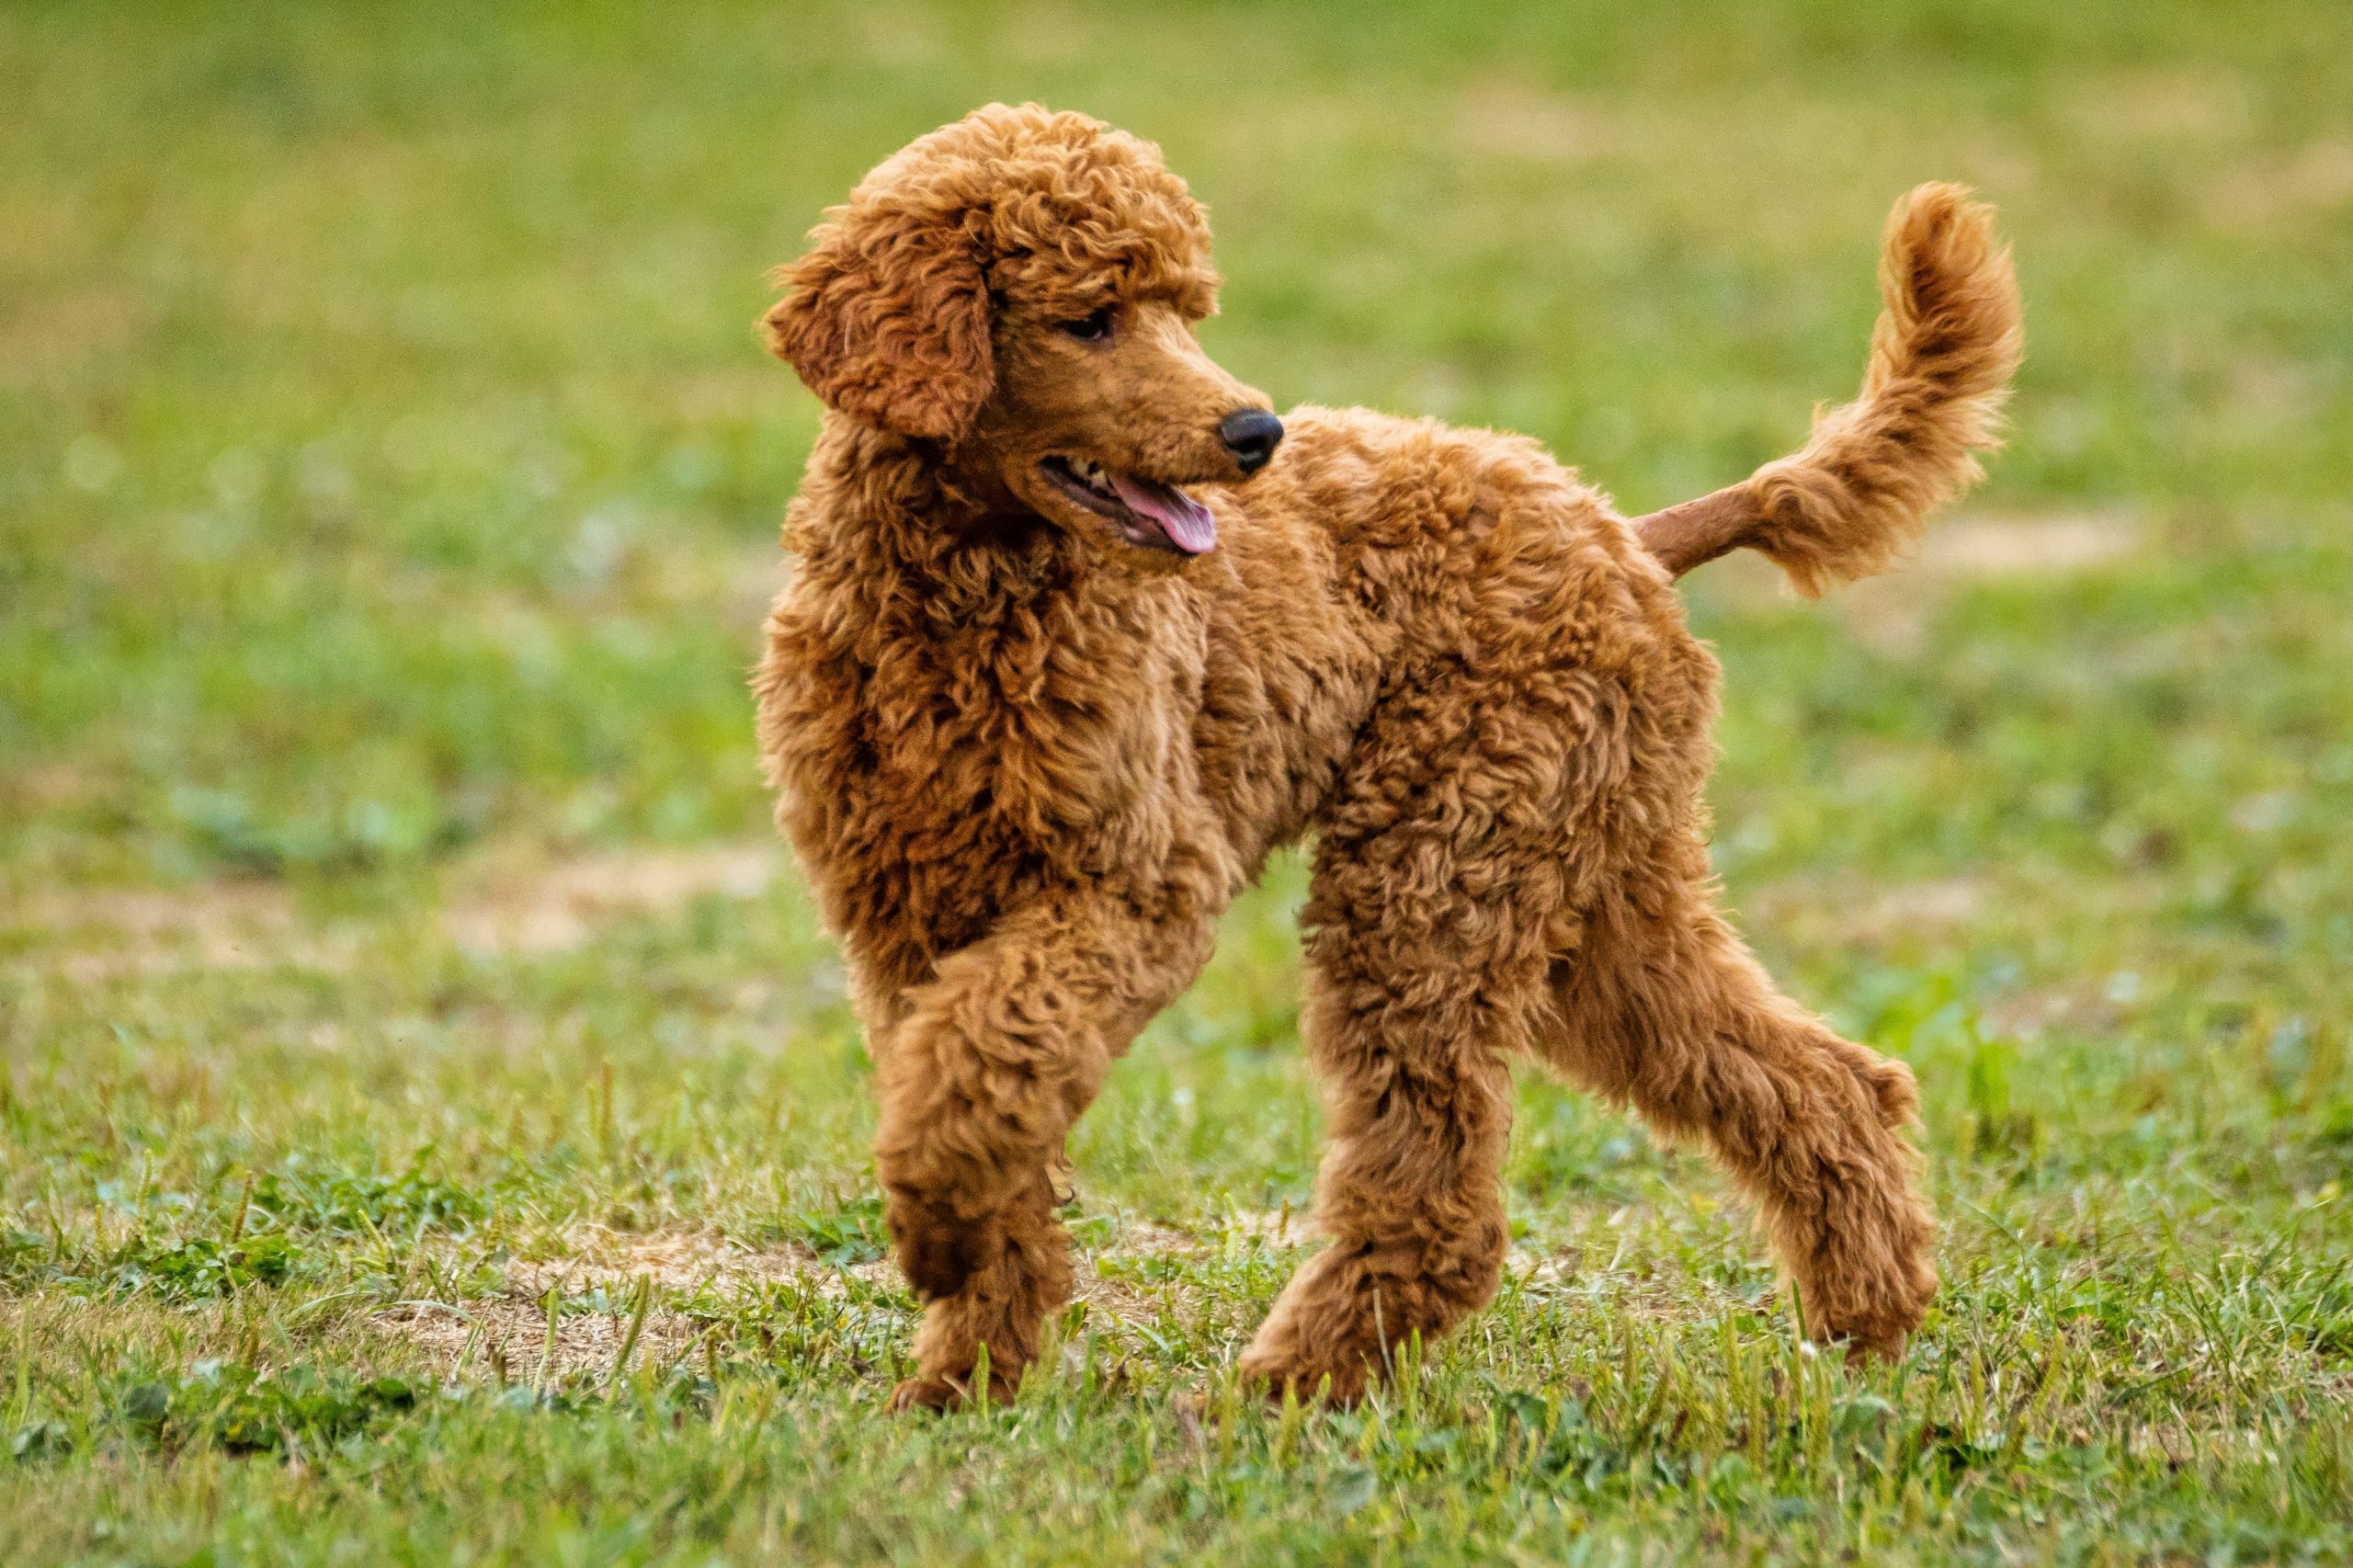 How much is a brown Poodle puppy to buy and upkeep?